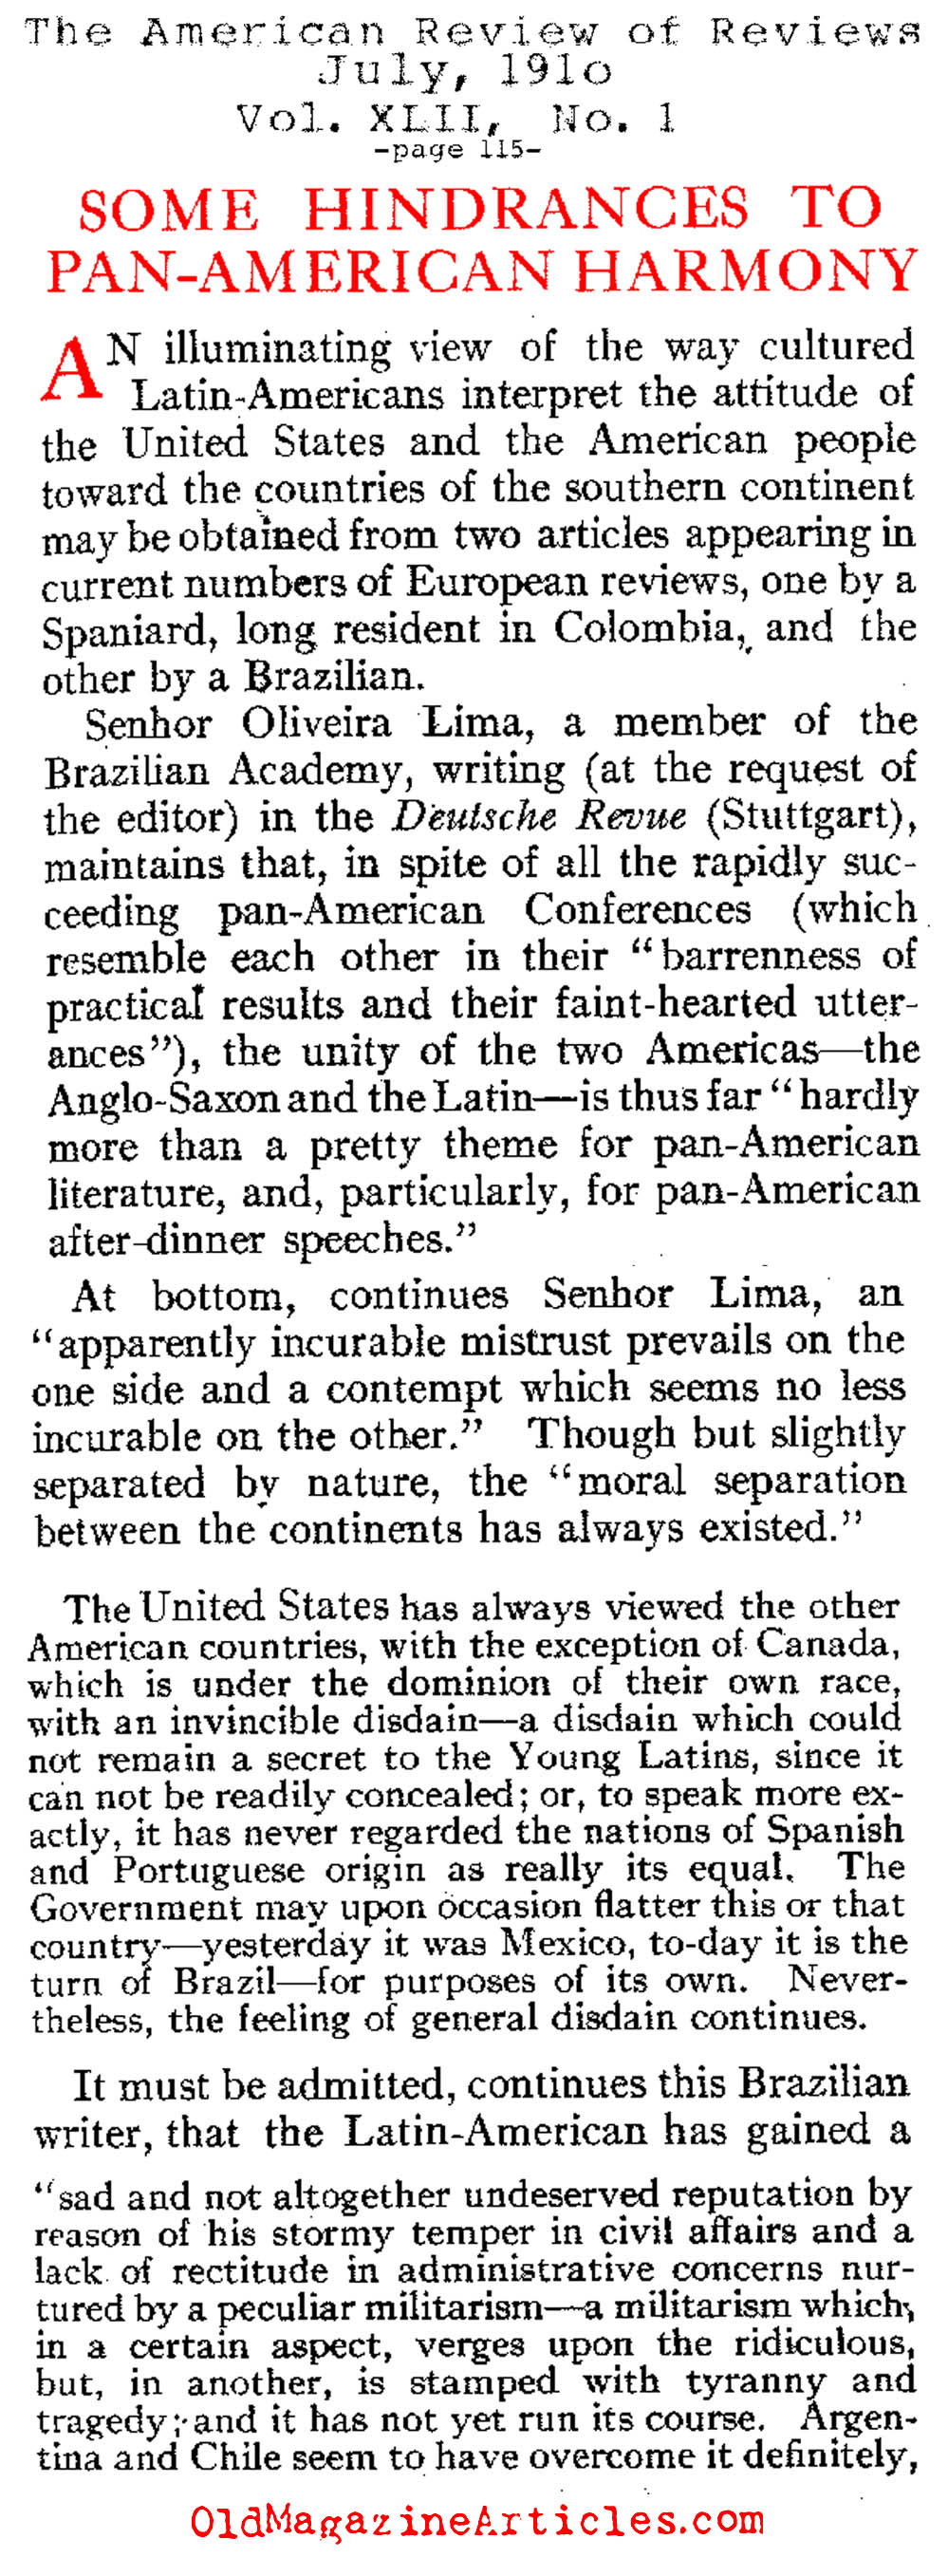 The Anglo-Saxon North and the Latin - American South in 1910 (Review of Reviews, 1910)